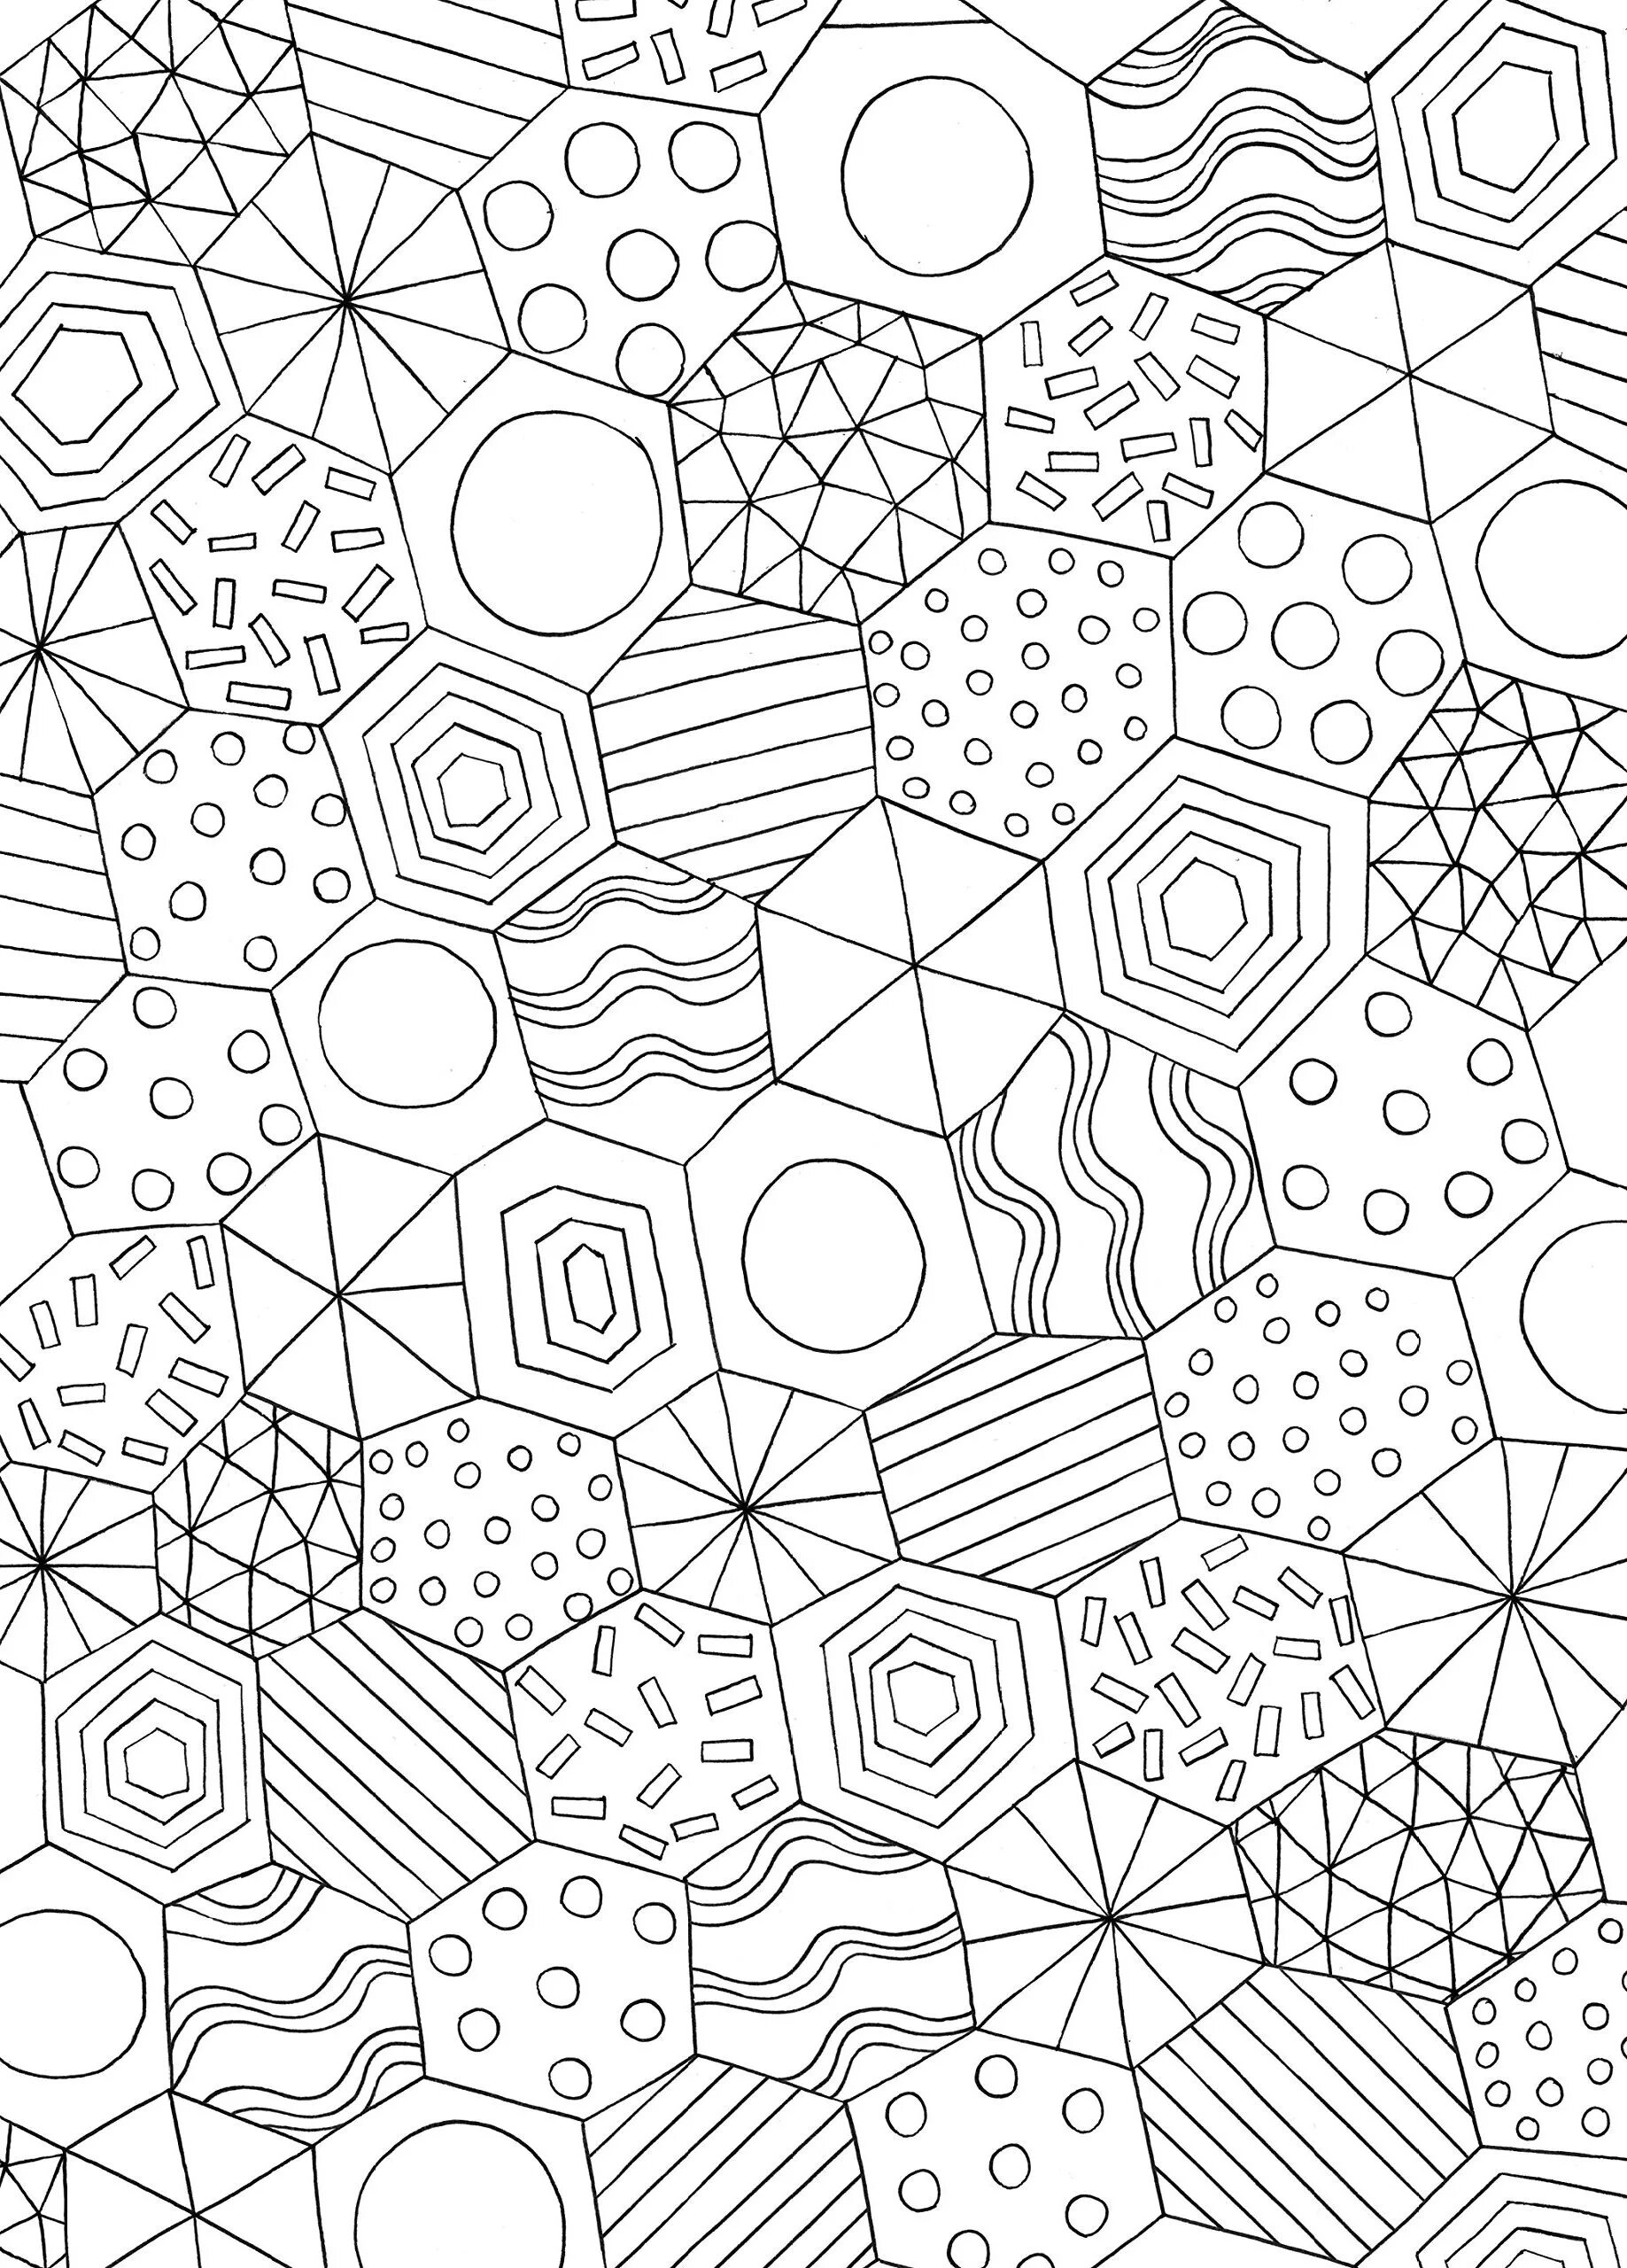 Exciting geometric coloring page